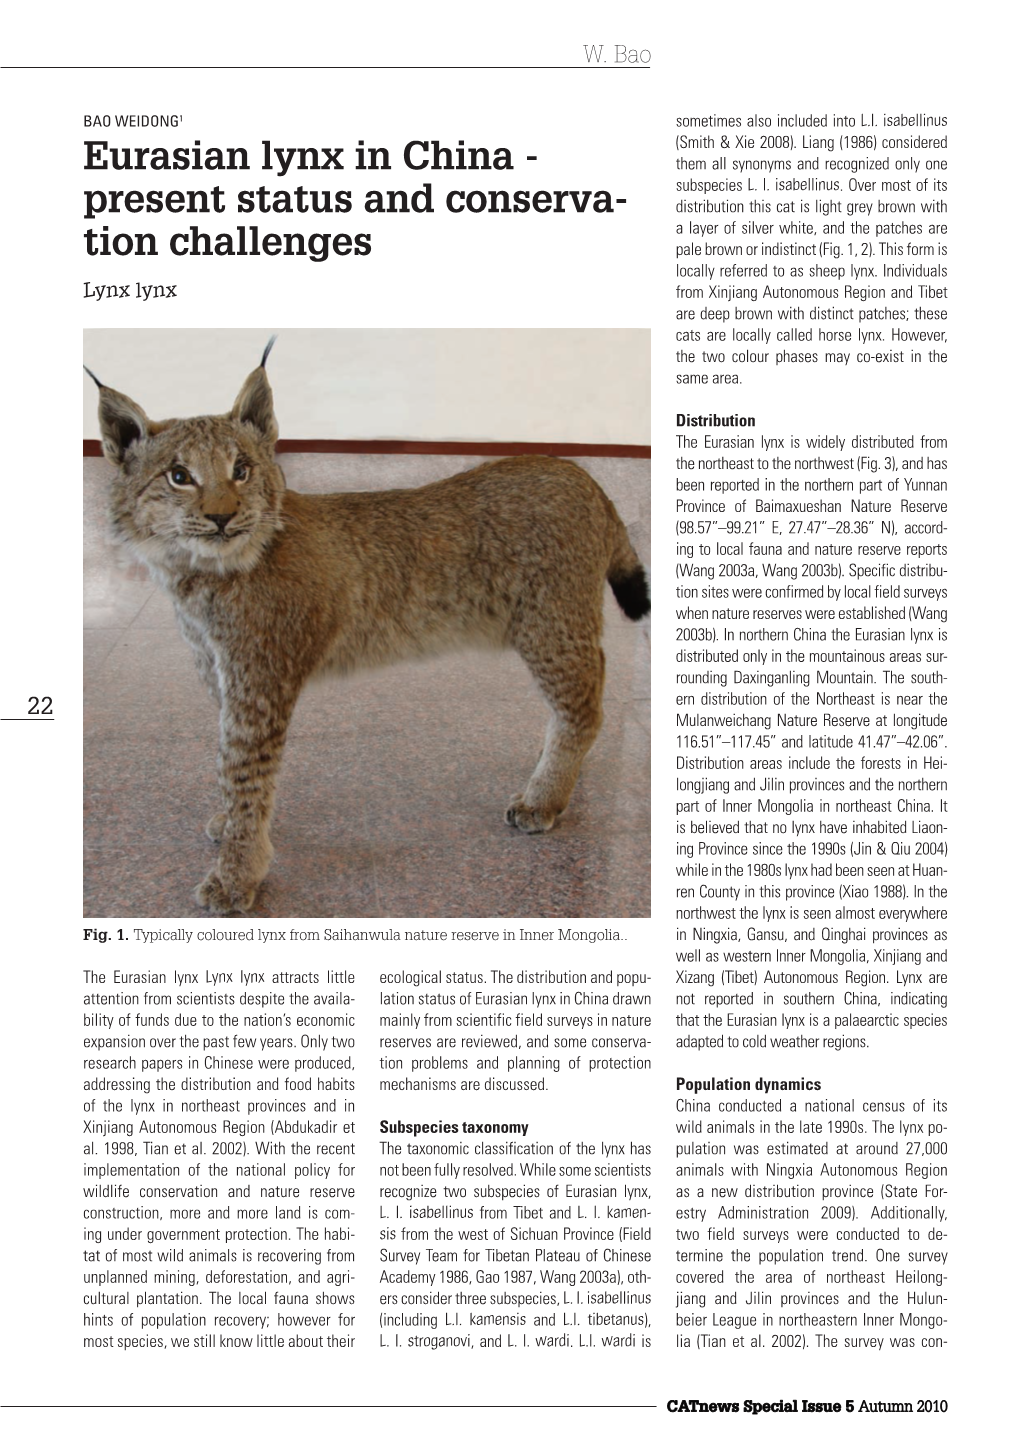 Eurasian Lynx in China - Them All Synonyms and Recognized Only One Subspecies L